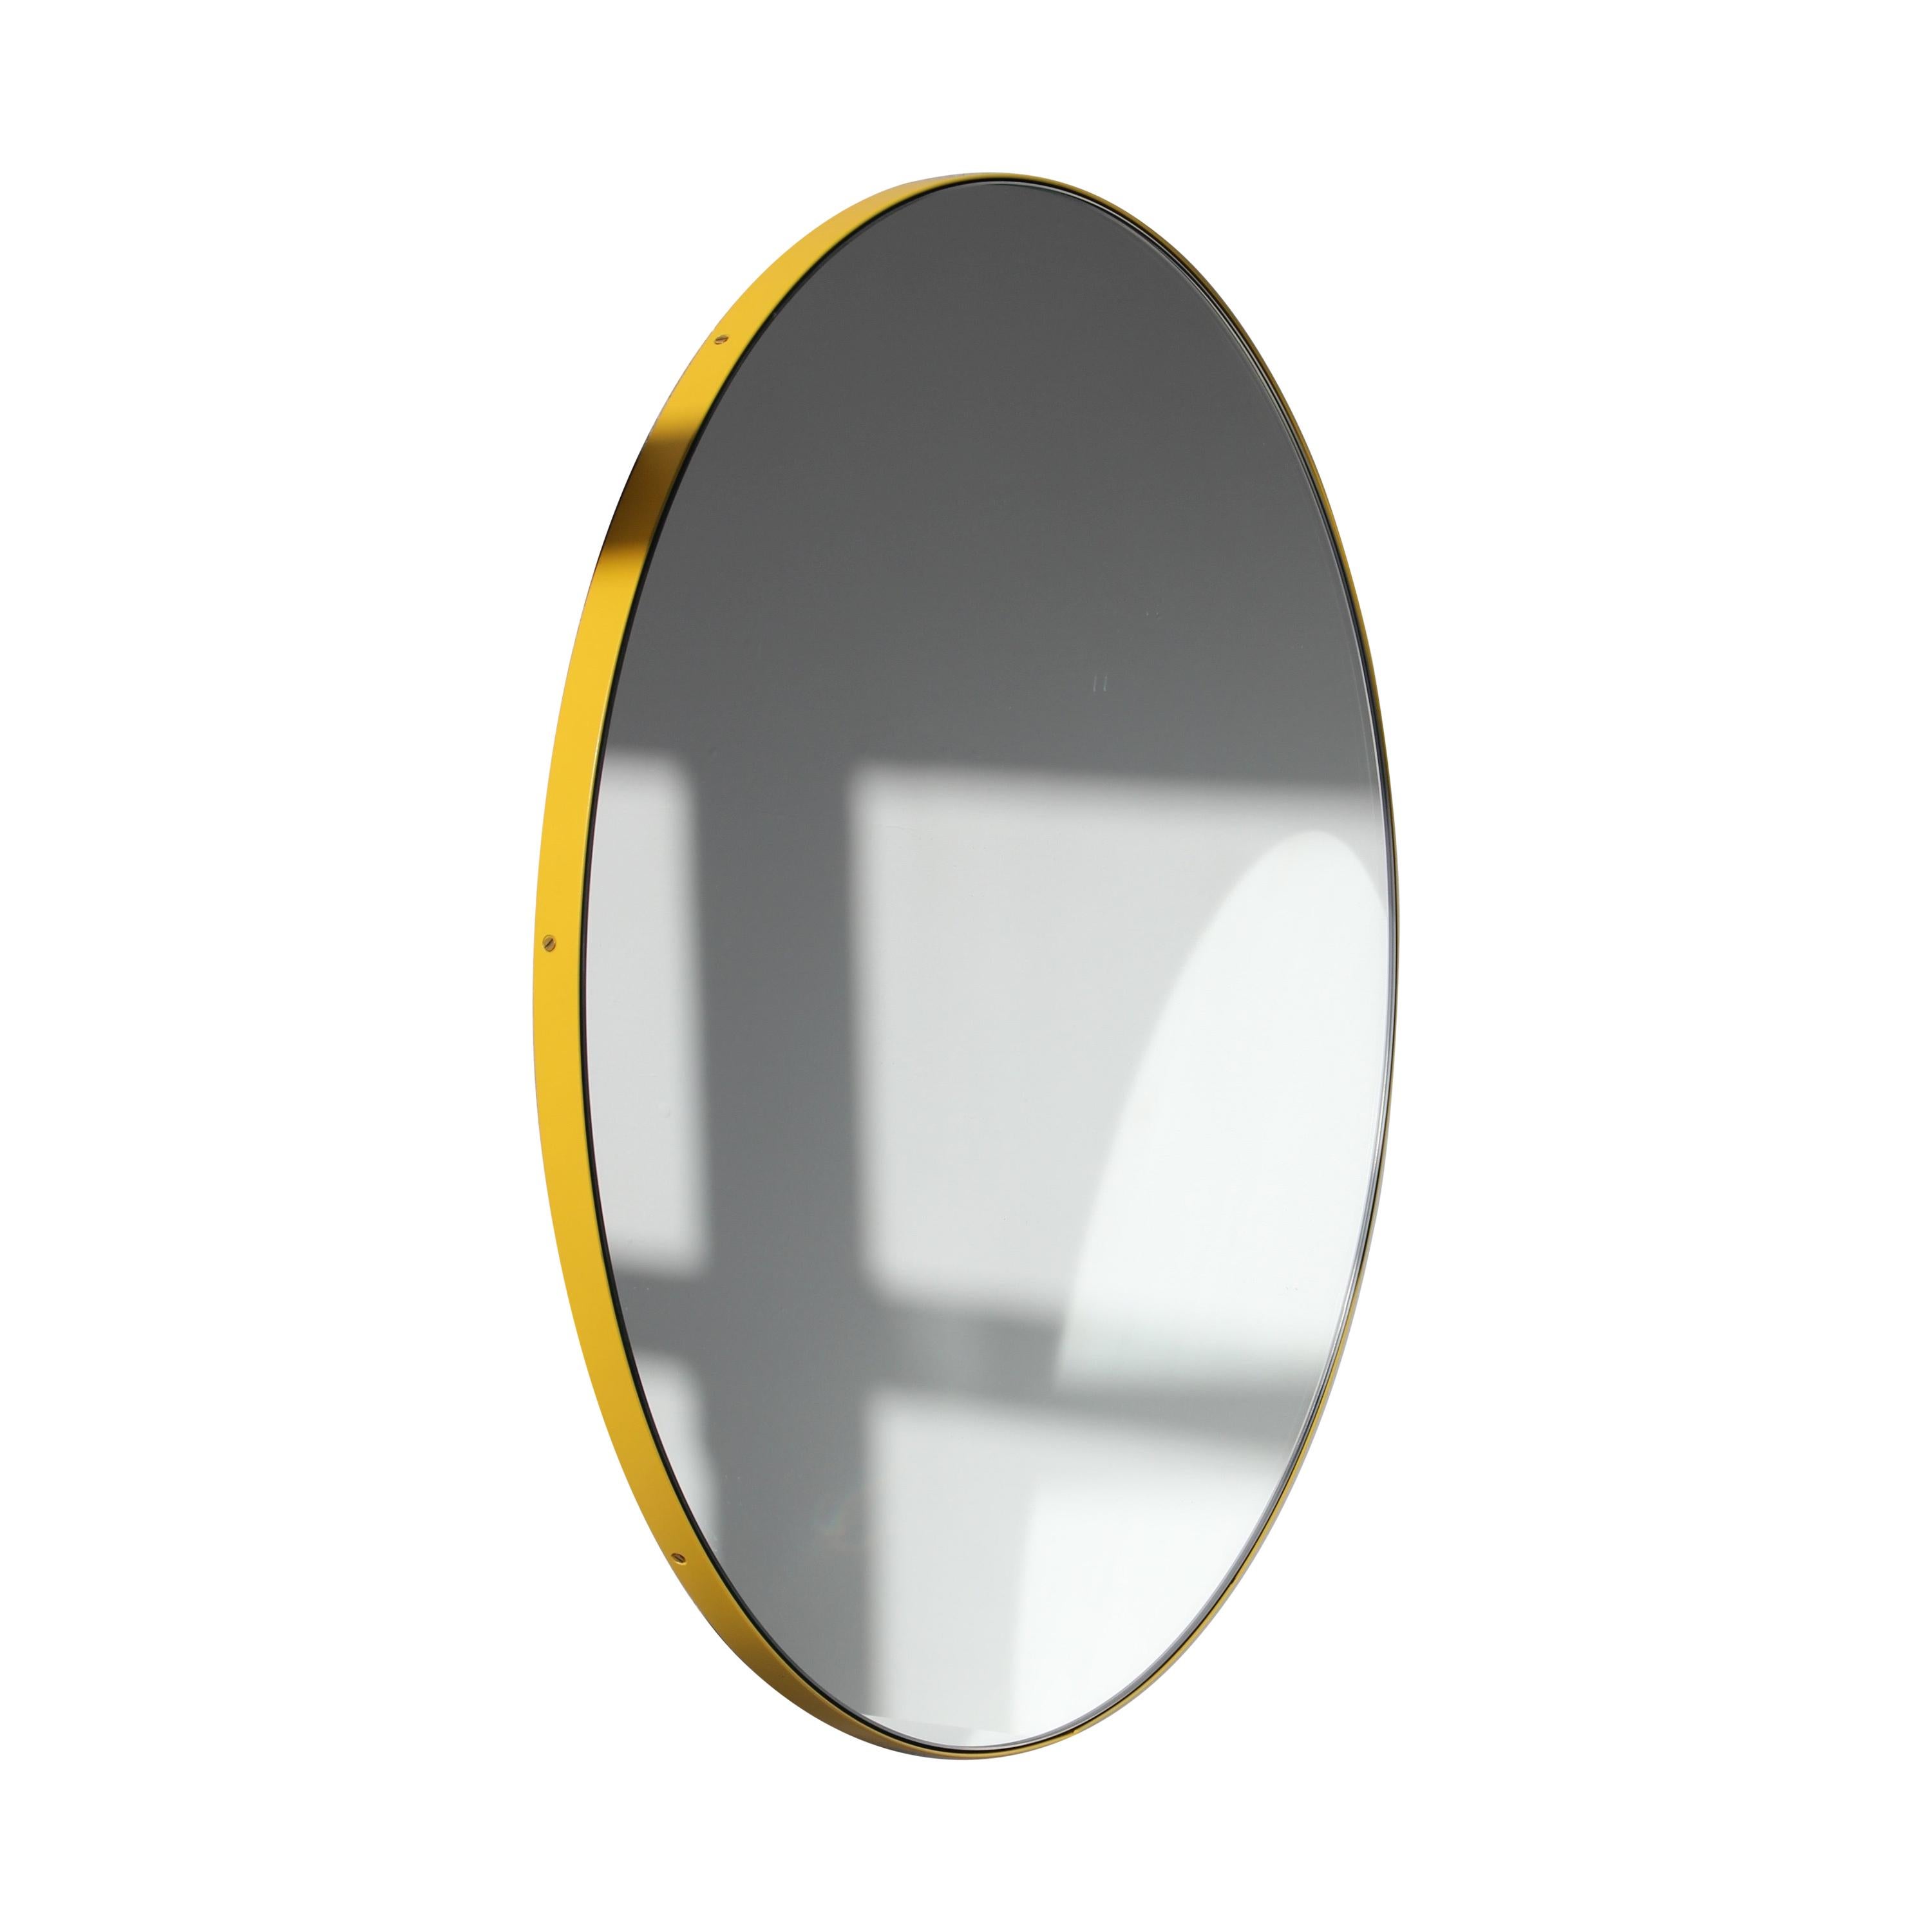 Orbis Circular Contemporary Customisable Mirror with Yellow Frame - Large